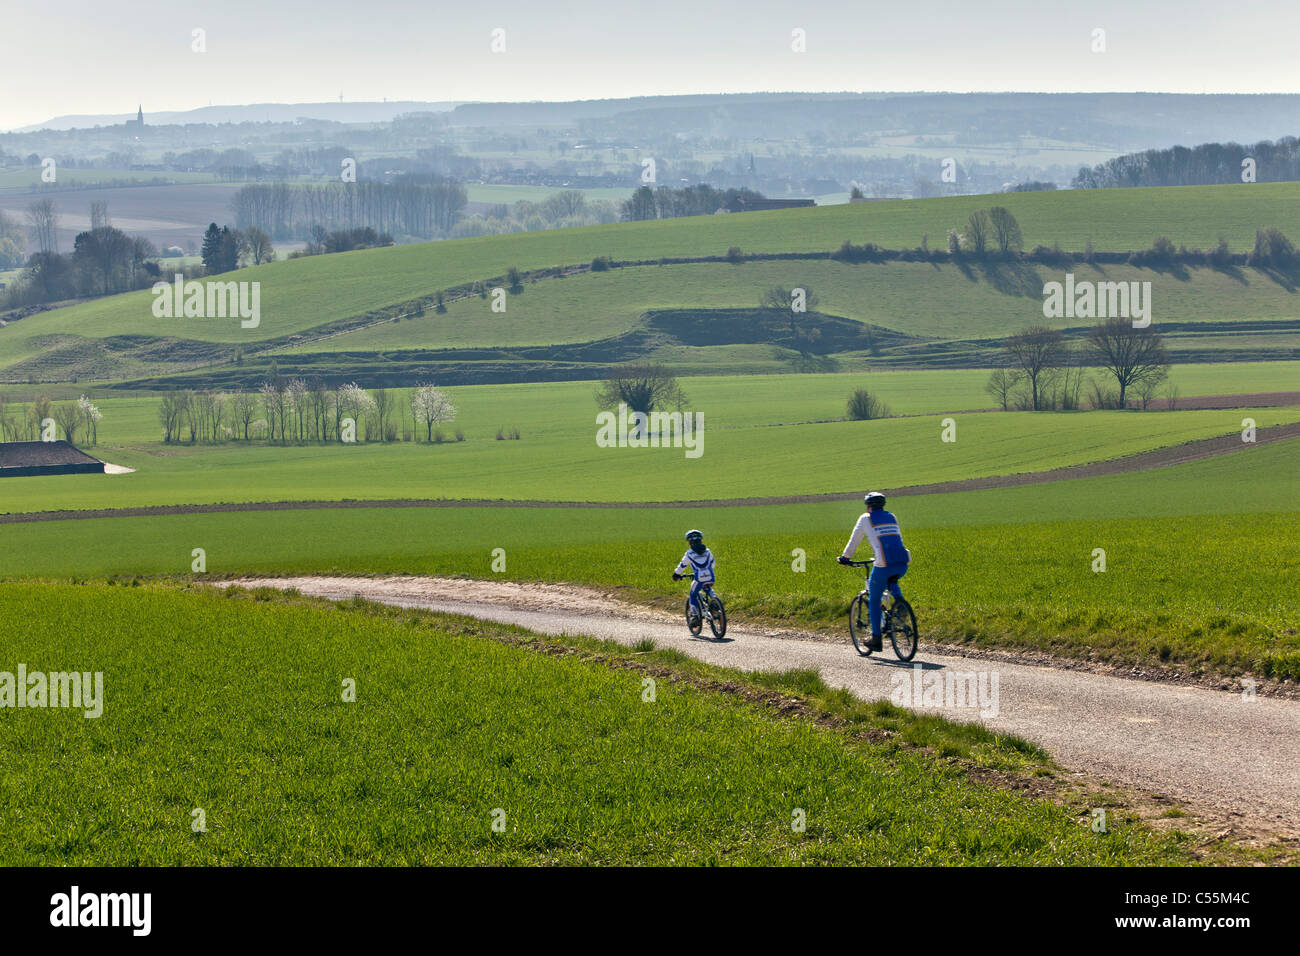 The Netherlands, Gulpen. Cyclists, father and son, taking part in tourversion of Amstel Gold Race 2010 Stock Photo